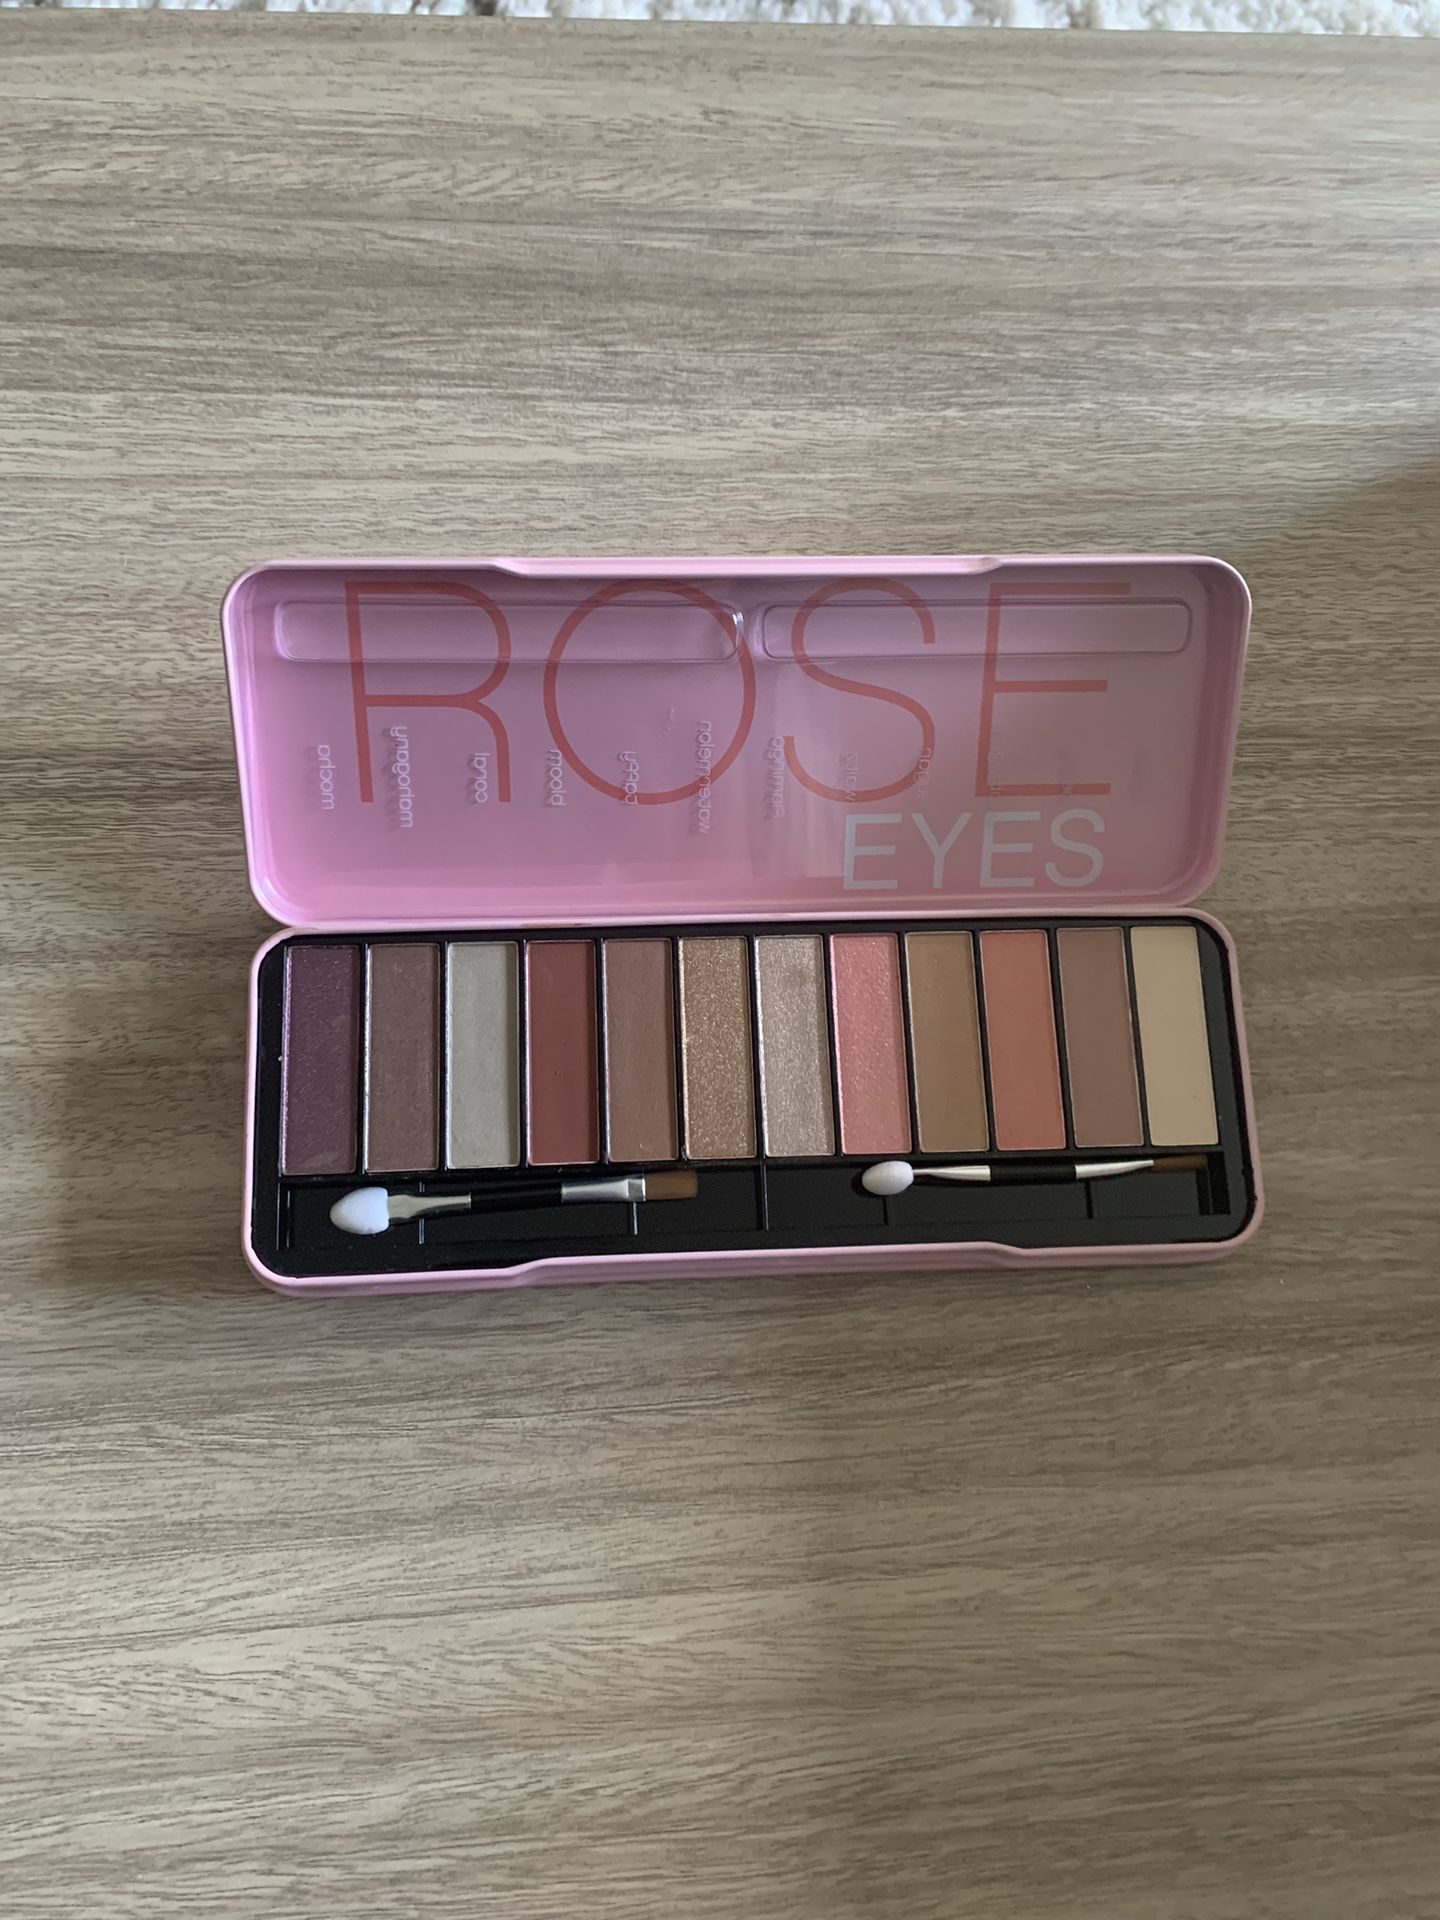 NWT Rose Eyes Palette in 12 Eyeshadows Total With 2 Brushes